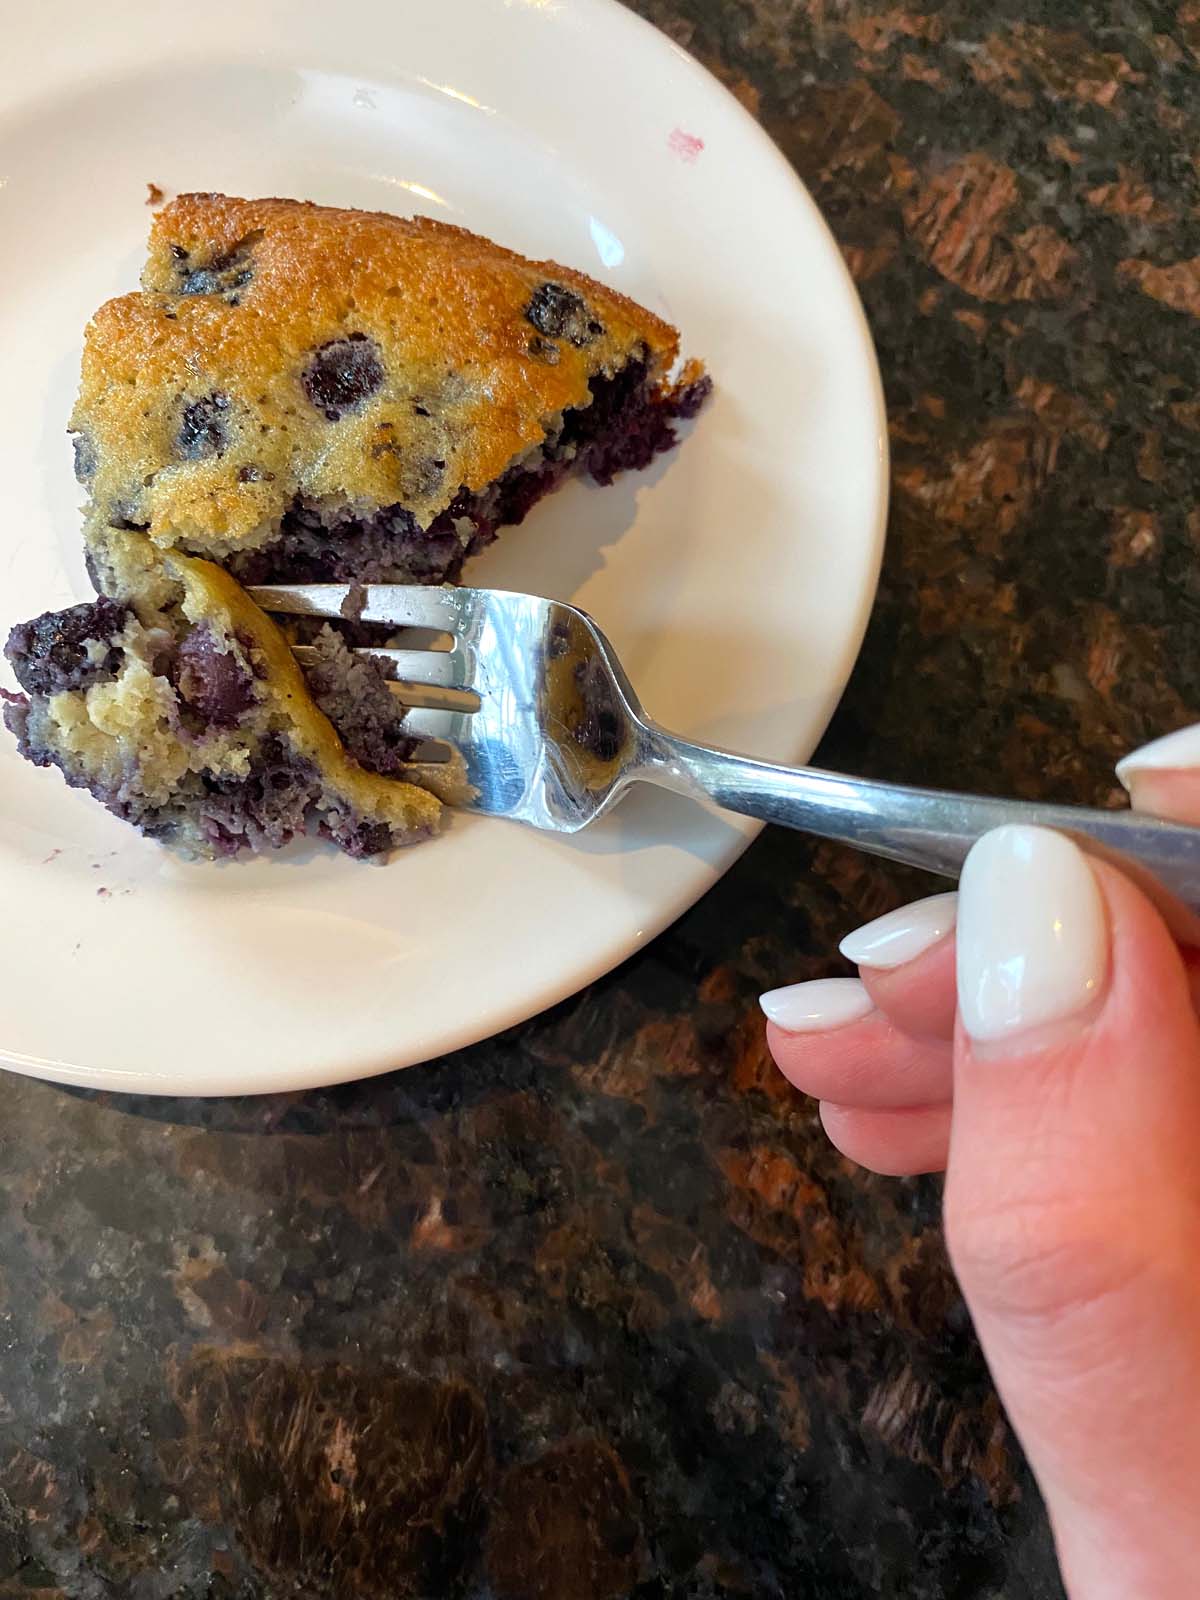 A slice of gluten free blueberry cake on a plate with a fork digging into it.